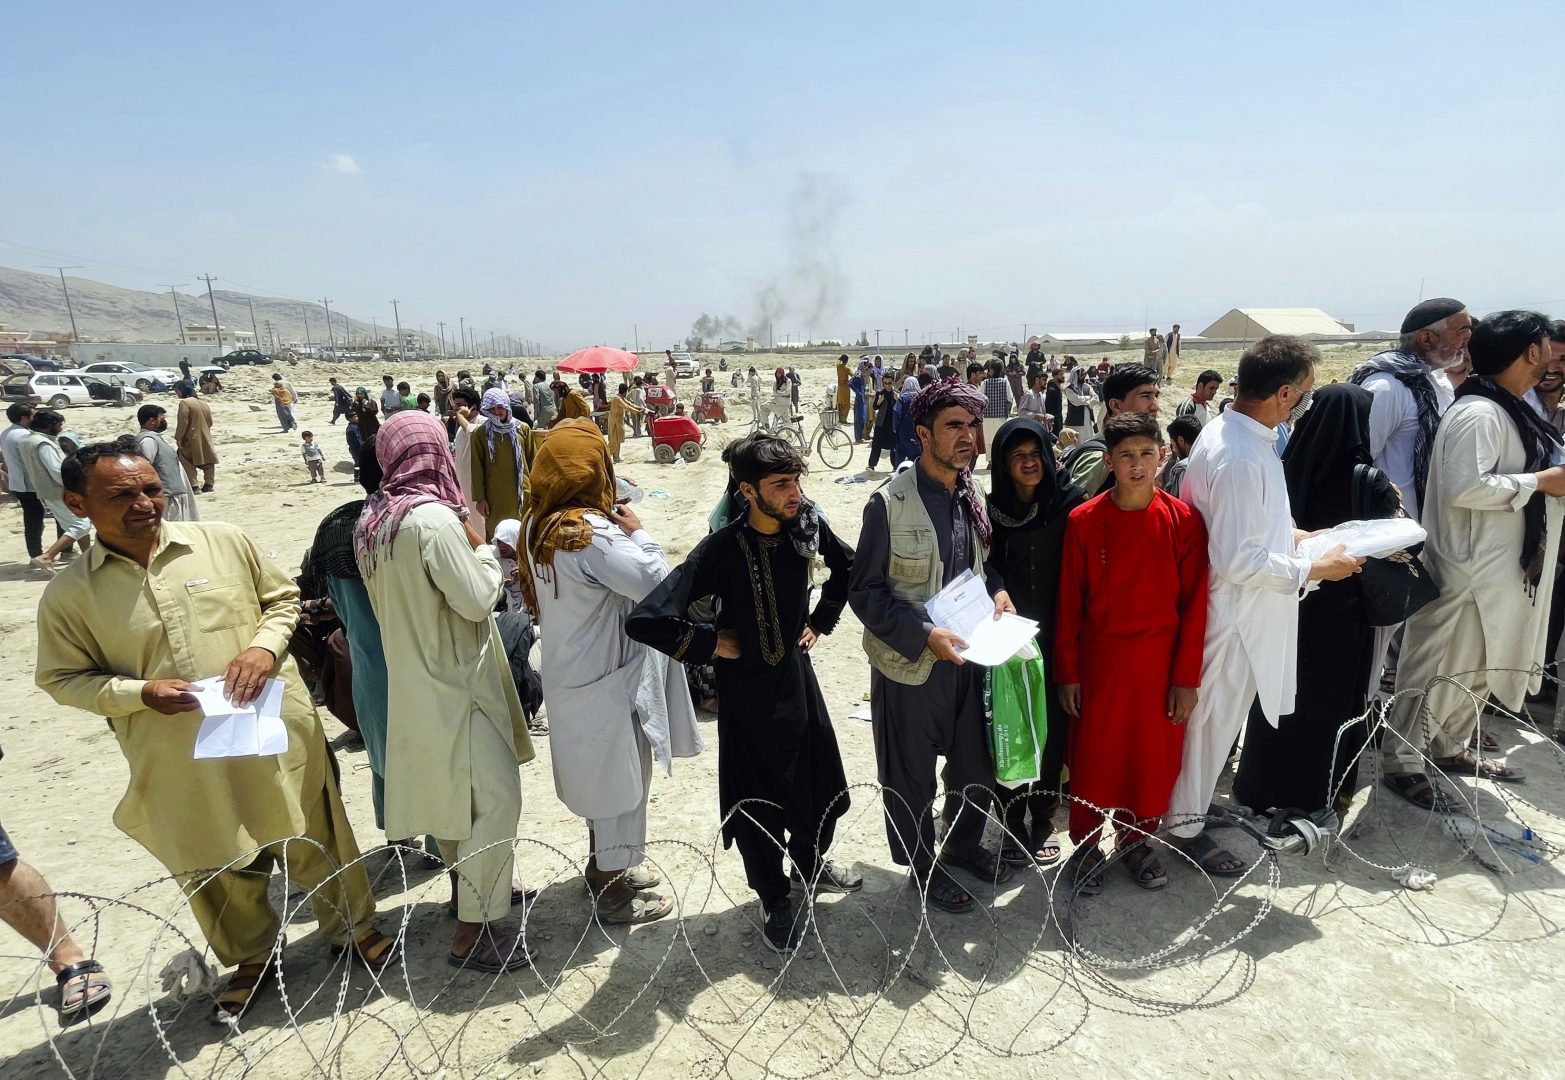 Hundreds of people gather outside the international airport in Kabul, Afghanistan, Tuesday, Aug. 17, 2021. The Taliban declared an “amnesty” across Afghanistan and urged women to join their government Tuesday, seeking to convince a wary population that they have changed a day after deadly chaos gripped the main airport as desperate crowds tried to flee the country.